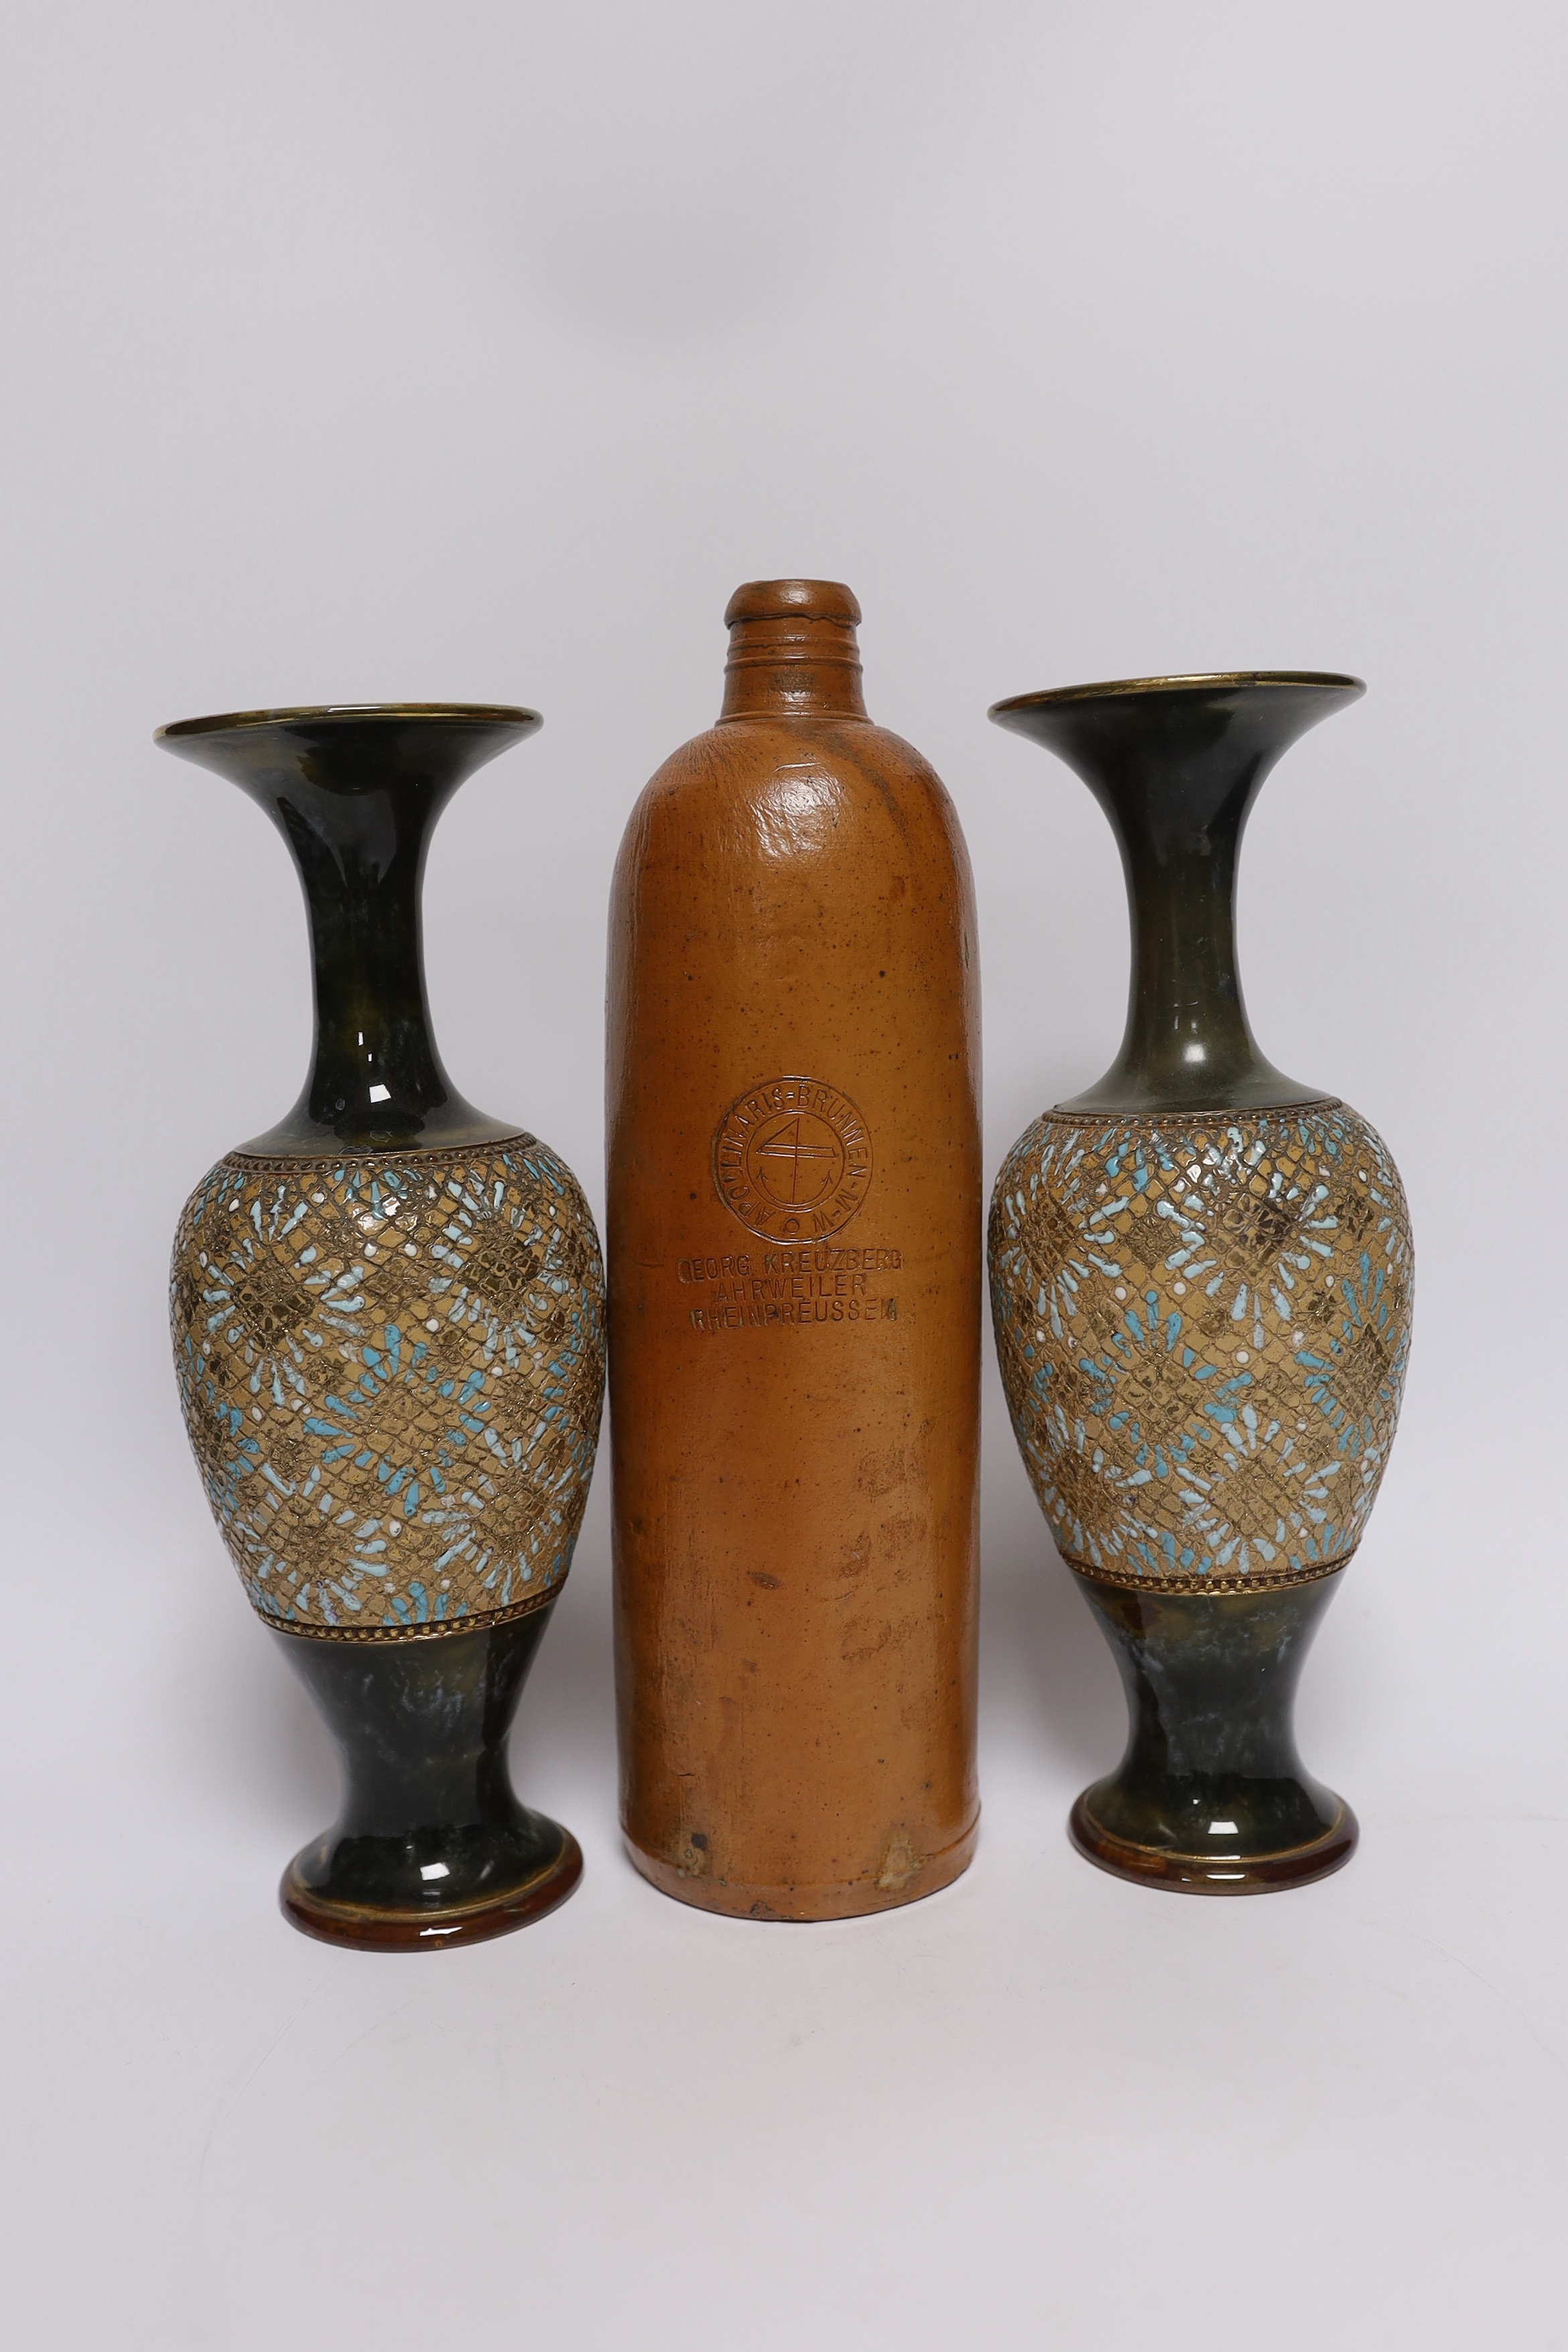 A pair of Doulton Lambeth vases, three jars, two with covers and a Georg Kreuzberg terracotta bottle